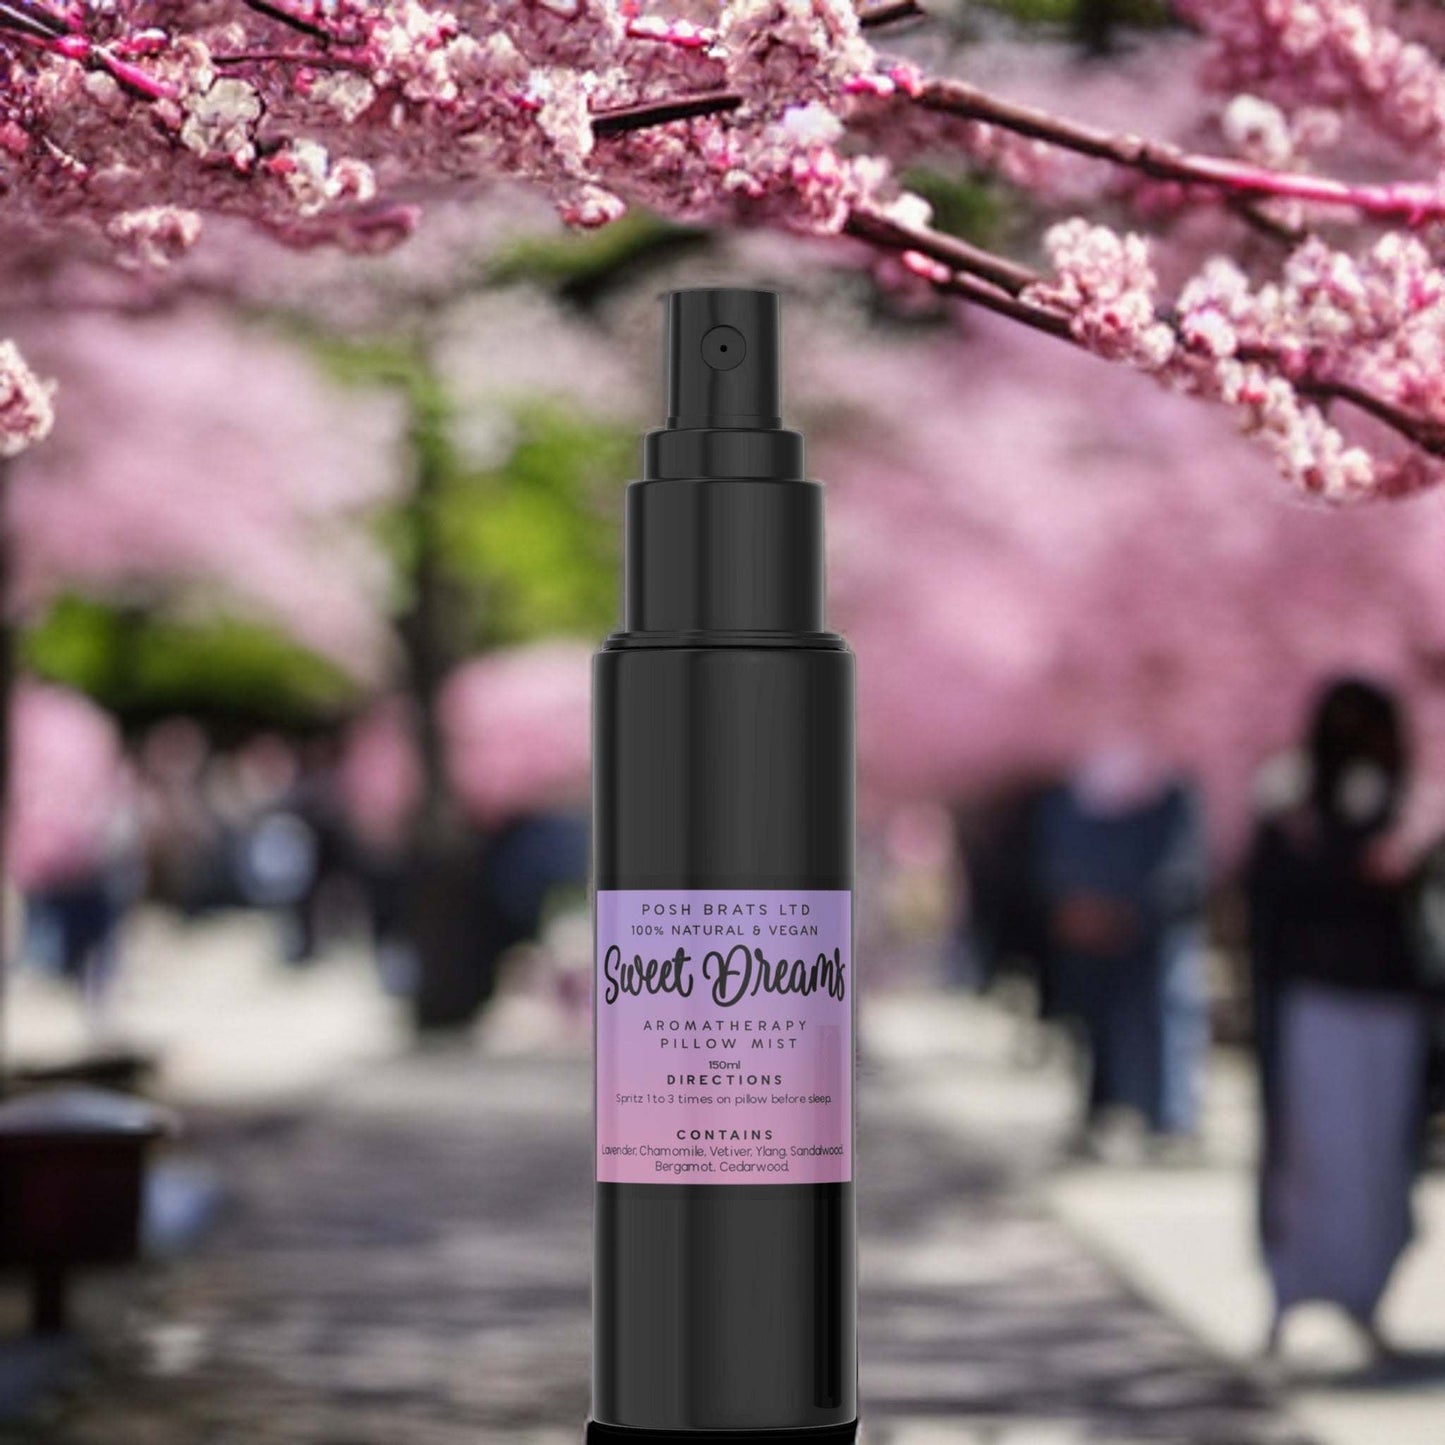 Indulge in the calming effects of our Sweet Dreams Pillow Mist. Magnesium and aromatherapy meet to lull you to sleep.